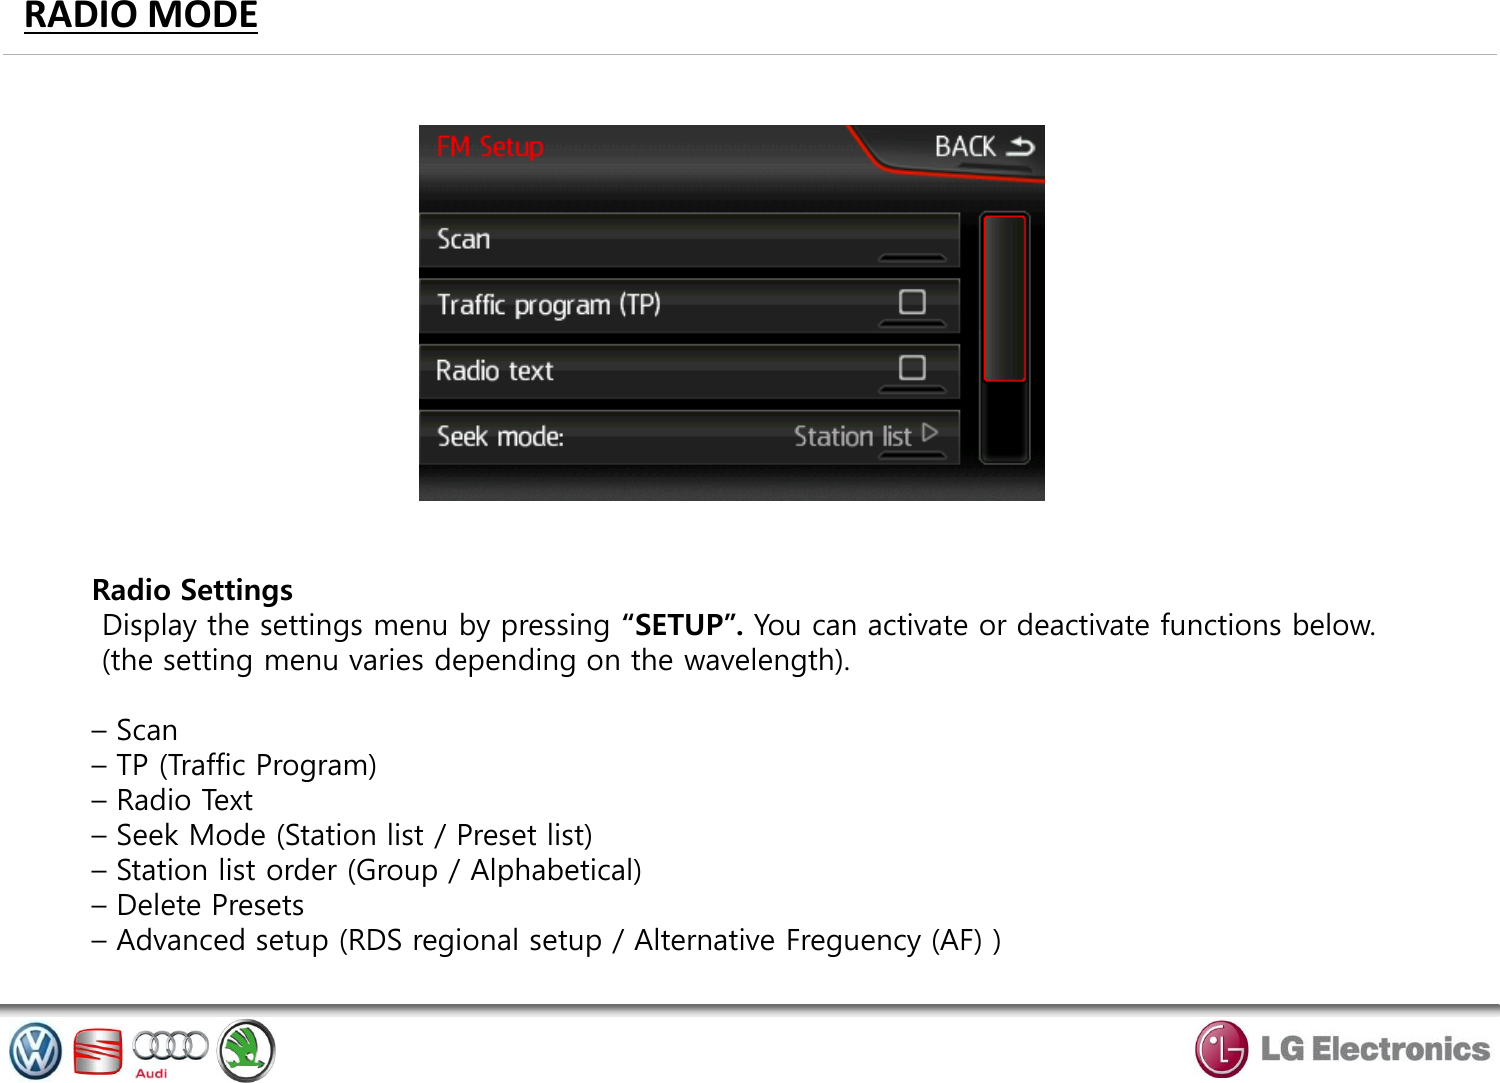 RADIO MODE Radio Settings  Display the settings menu by pressing “SETUP”. You can activate or deactivate functions below.  (the setting menu varies depending on the wavelength).  – Scan – TP (Traffic Program) – Radio Text – Seek Mode (Station list / Preset list) – Station list order (Group / Alphabetical) – Delete Presets – Advanced setup (RDS regional setup / Alternative Freguency (AF) ) 